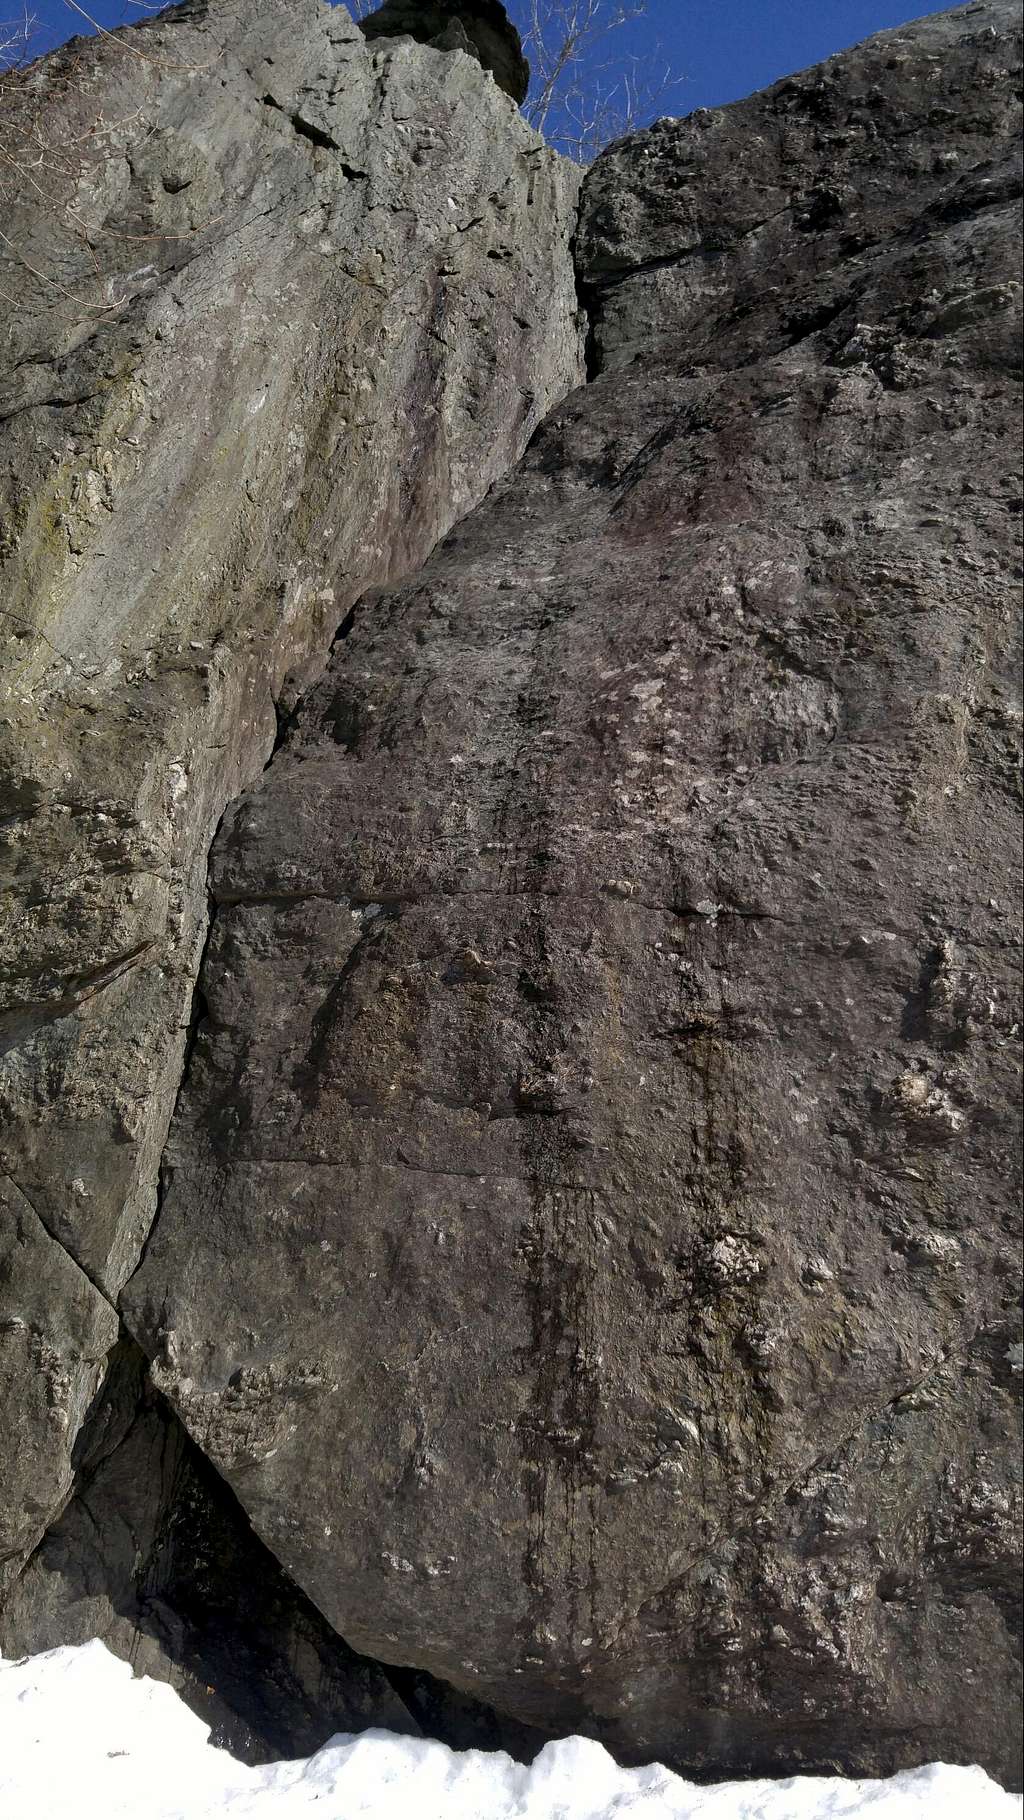 The Crack (5.3) and Nubble Face (5.4-5.6)